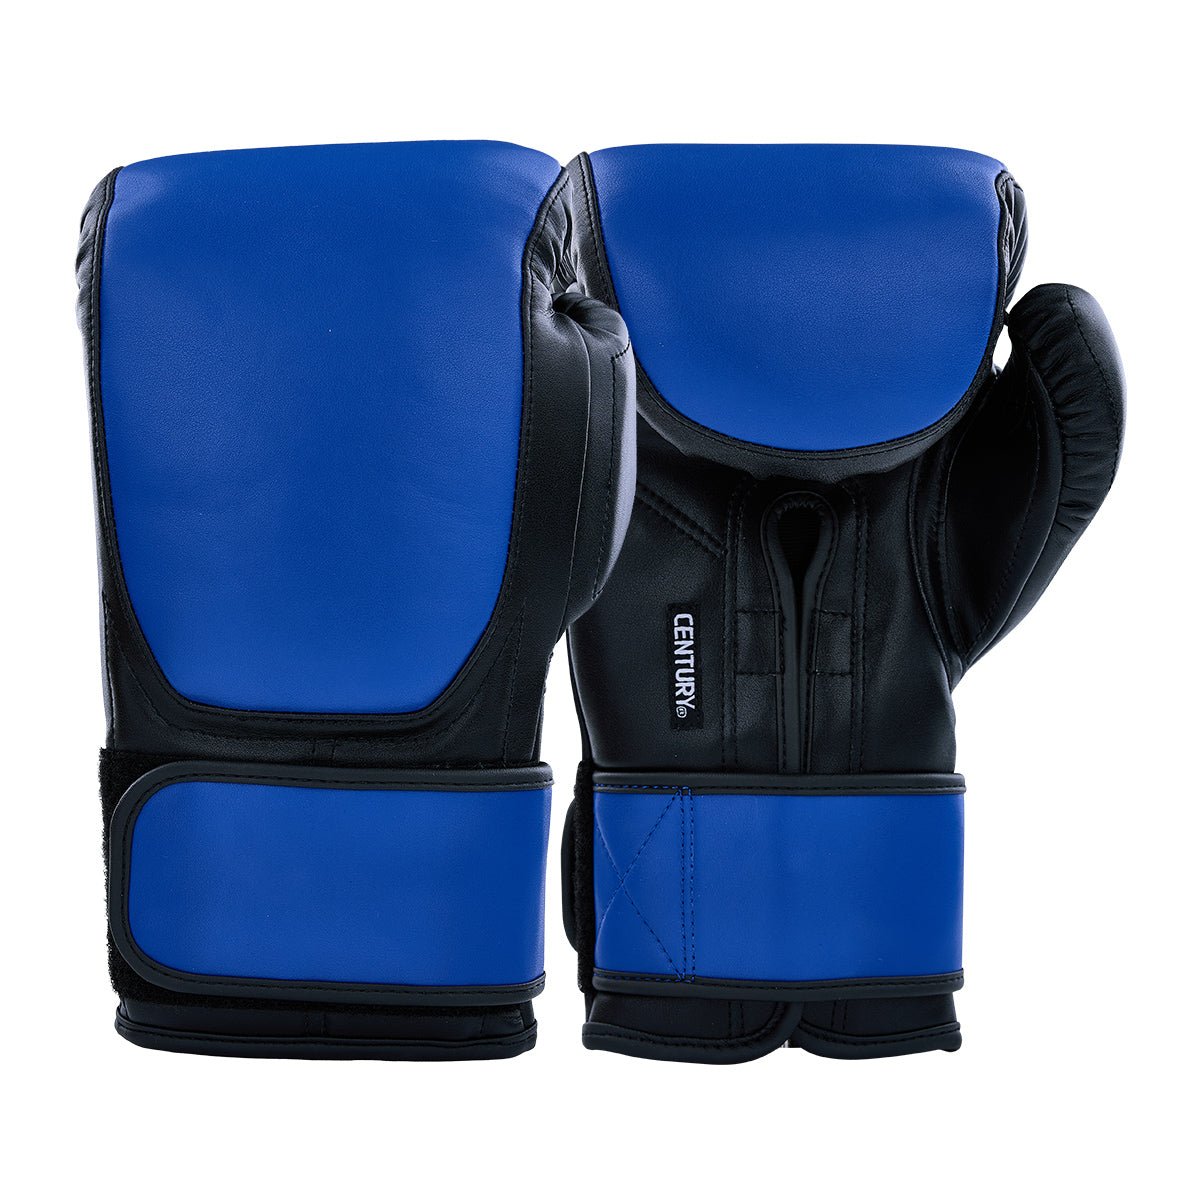 Century Solid Leather Bag Glove With Wrist Support Blue